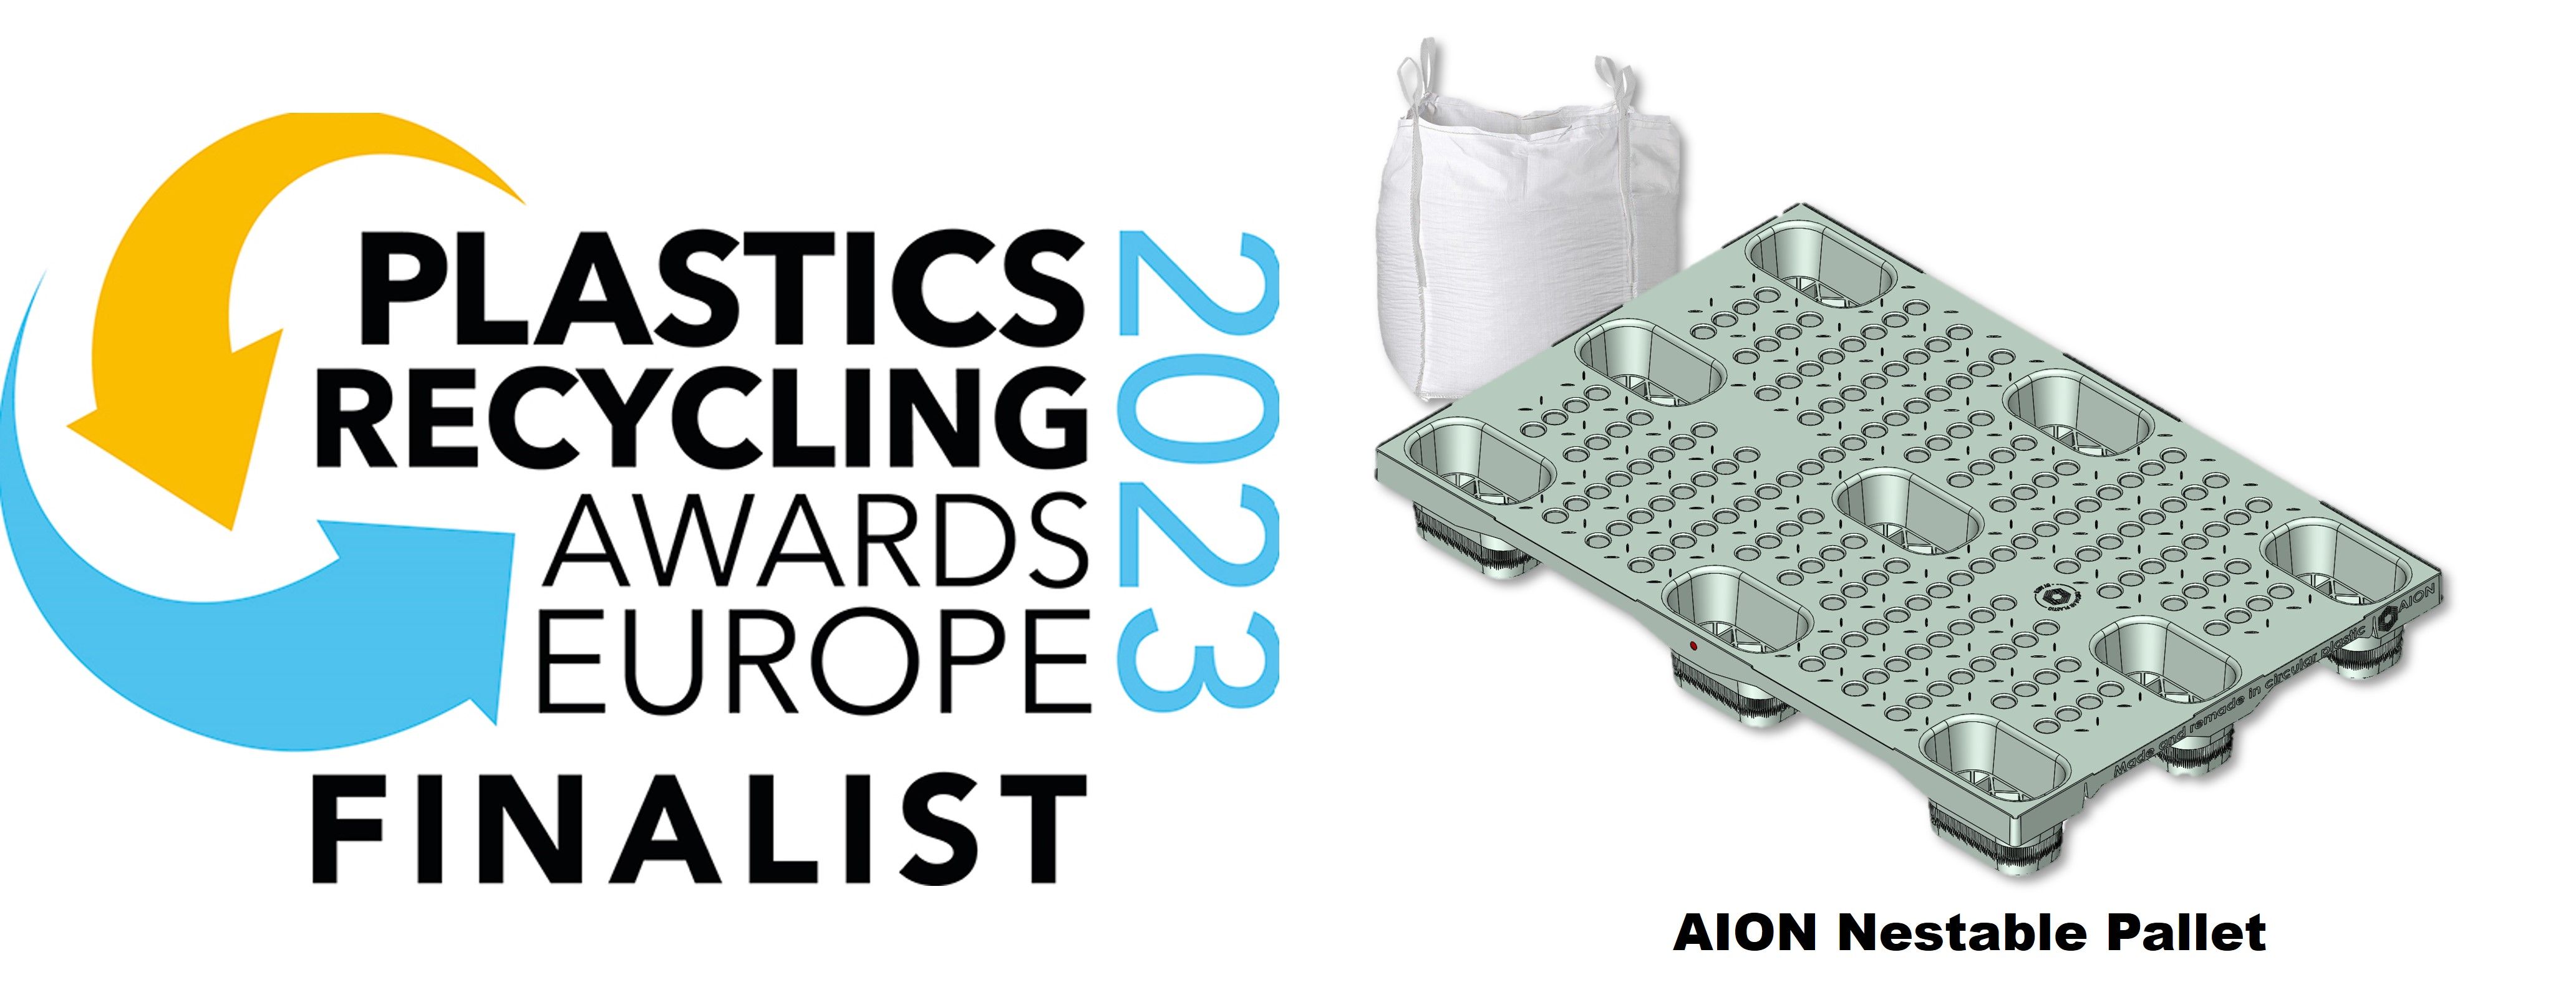 AION's Nestable Pallet shortlisted as finalist to the Plastics Recycling Awards Europe 2023